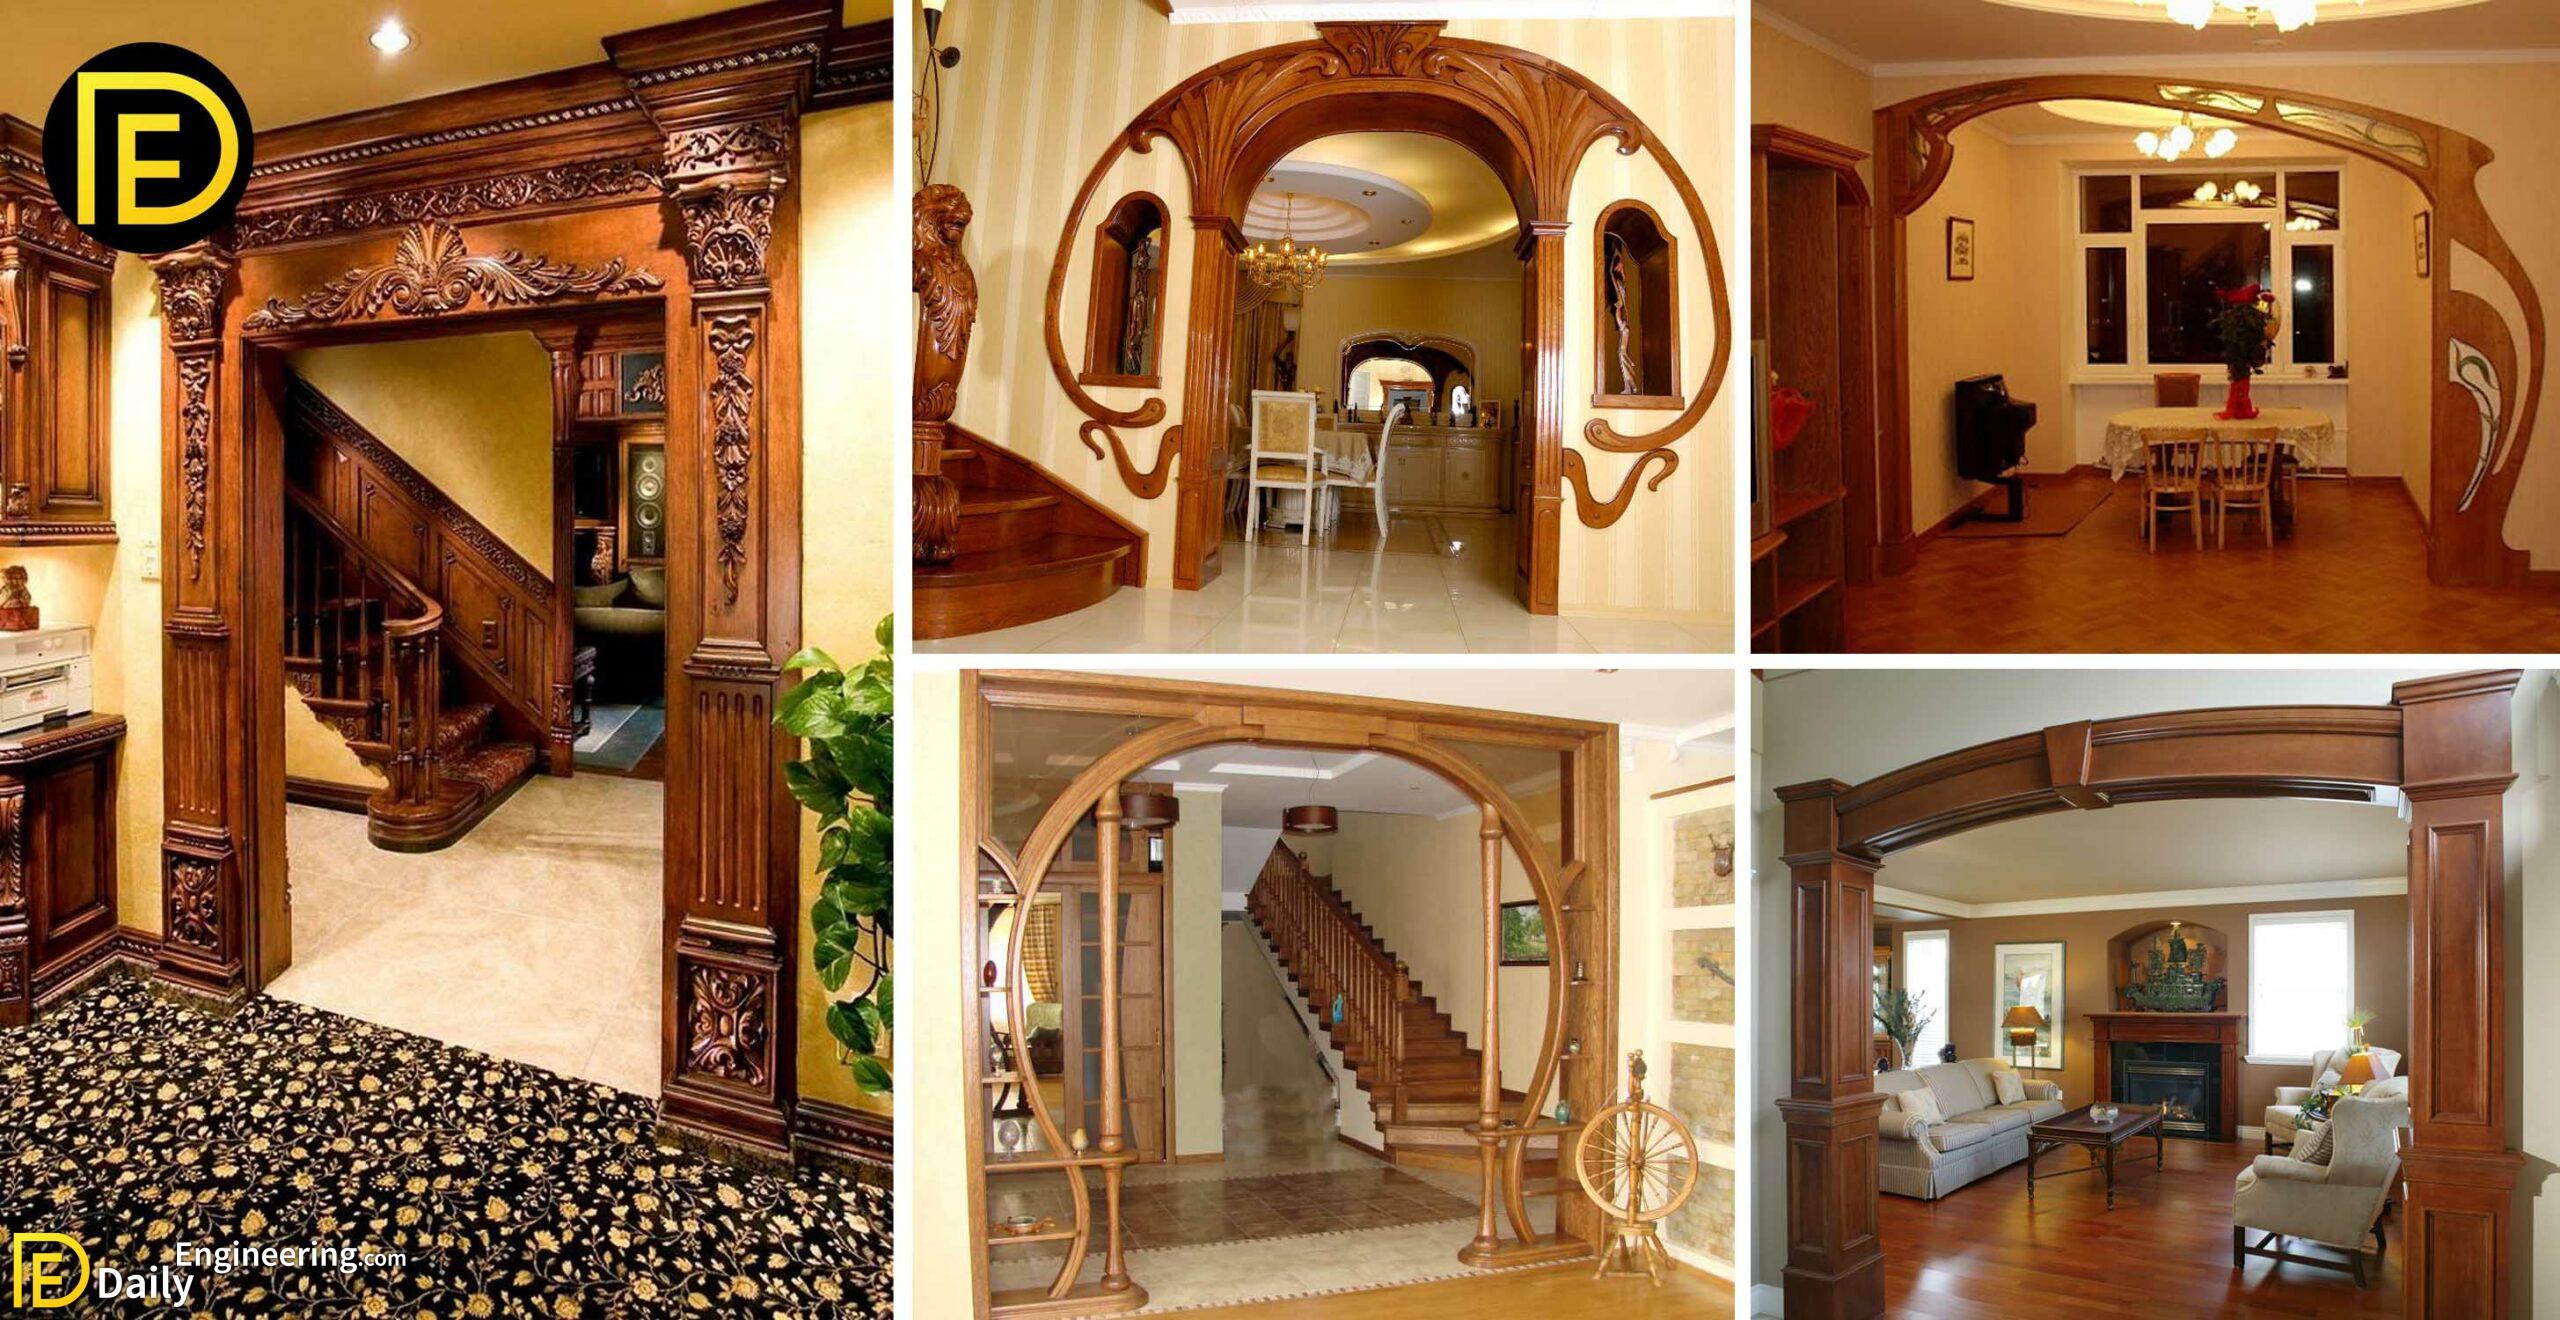 Top 30 Ideas To Decorate With Wooden Arches Your House Daily Engineering